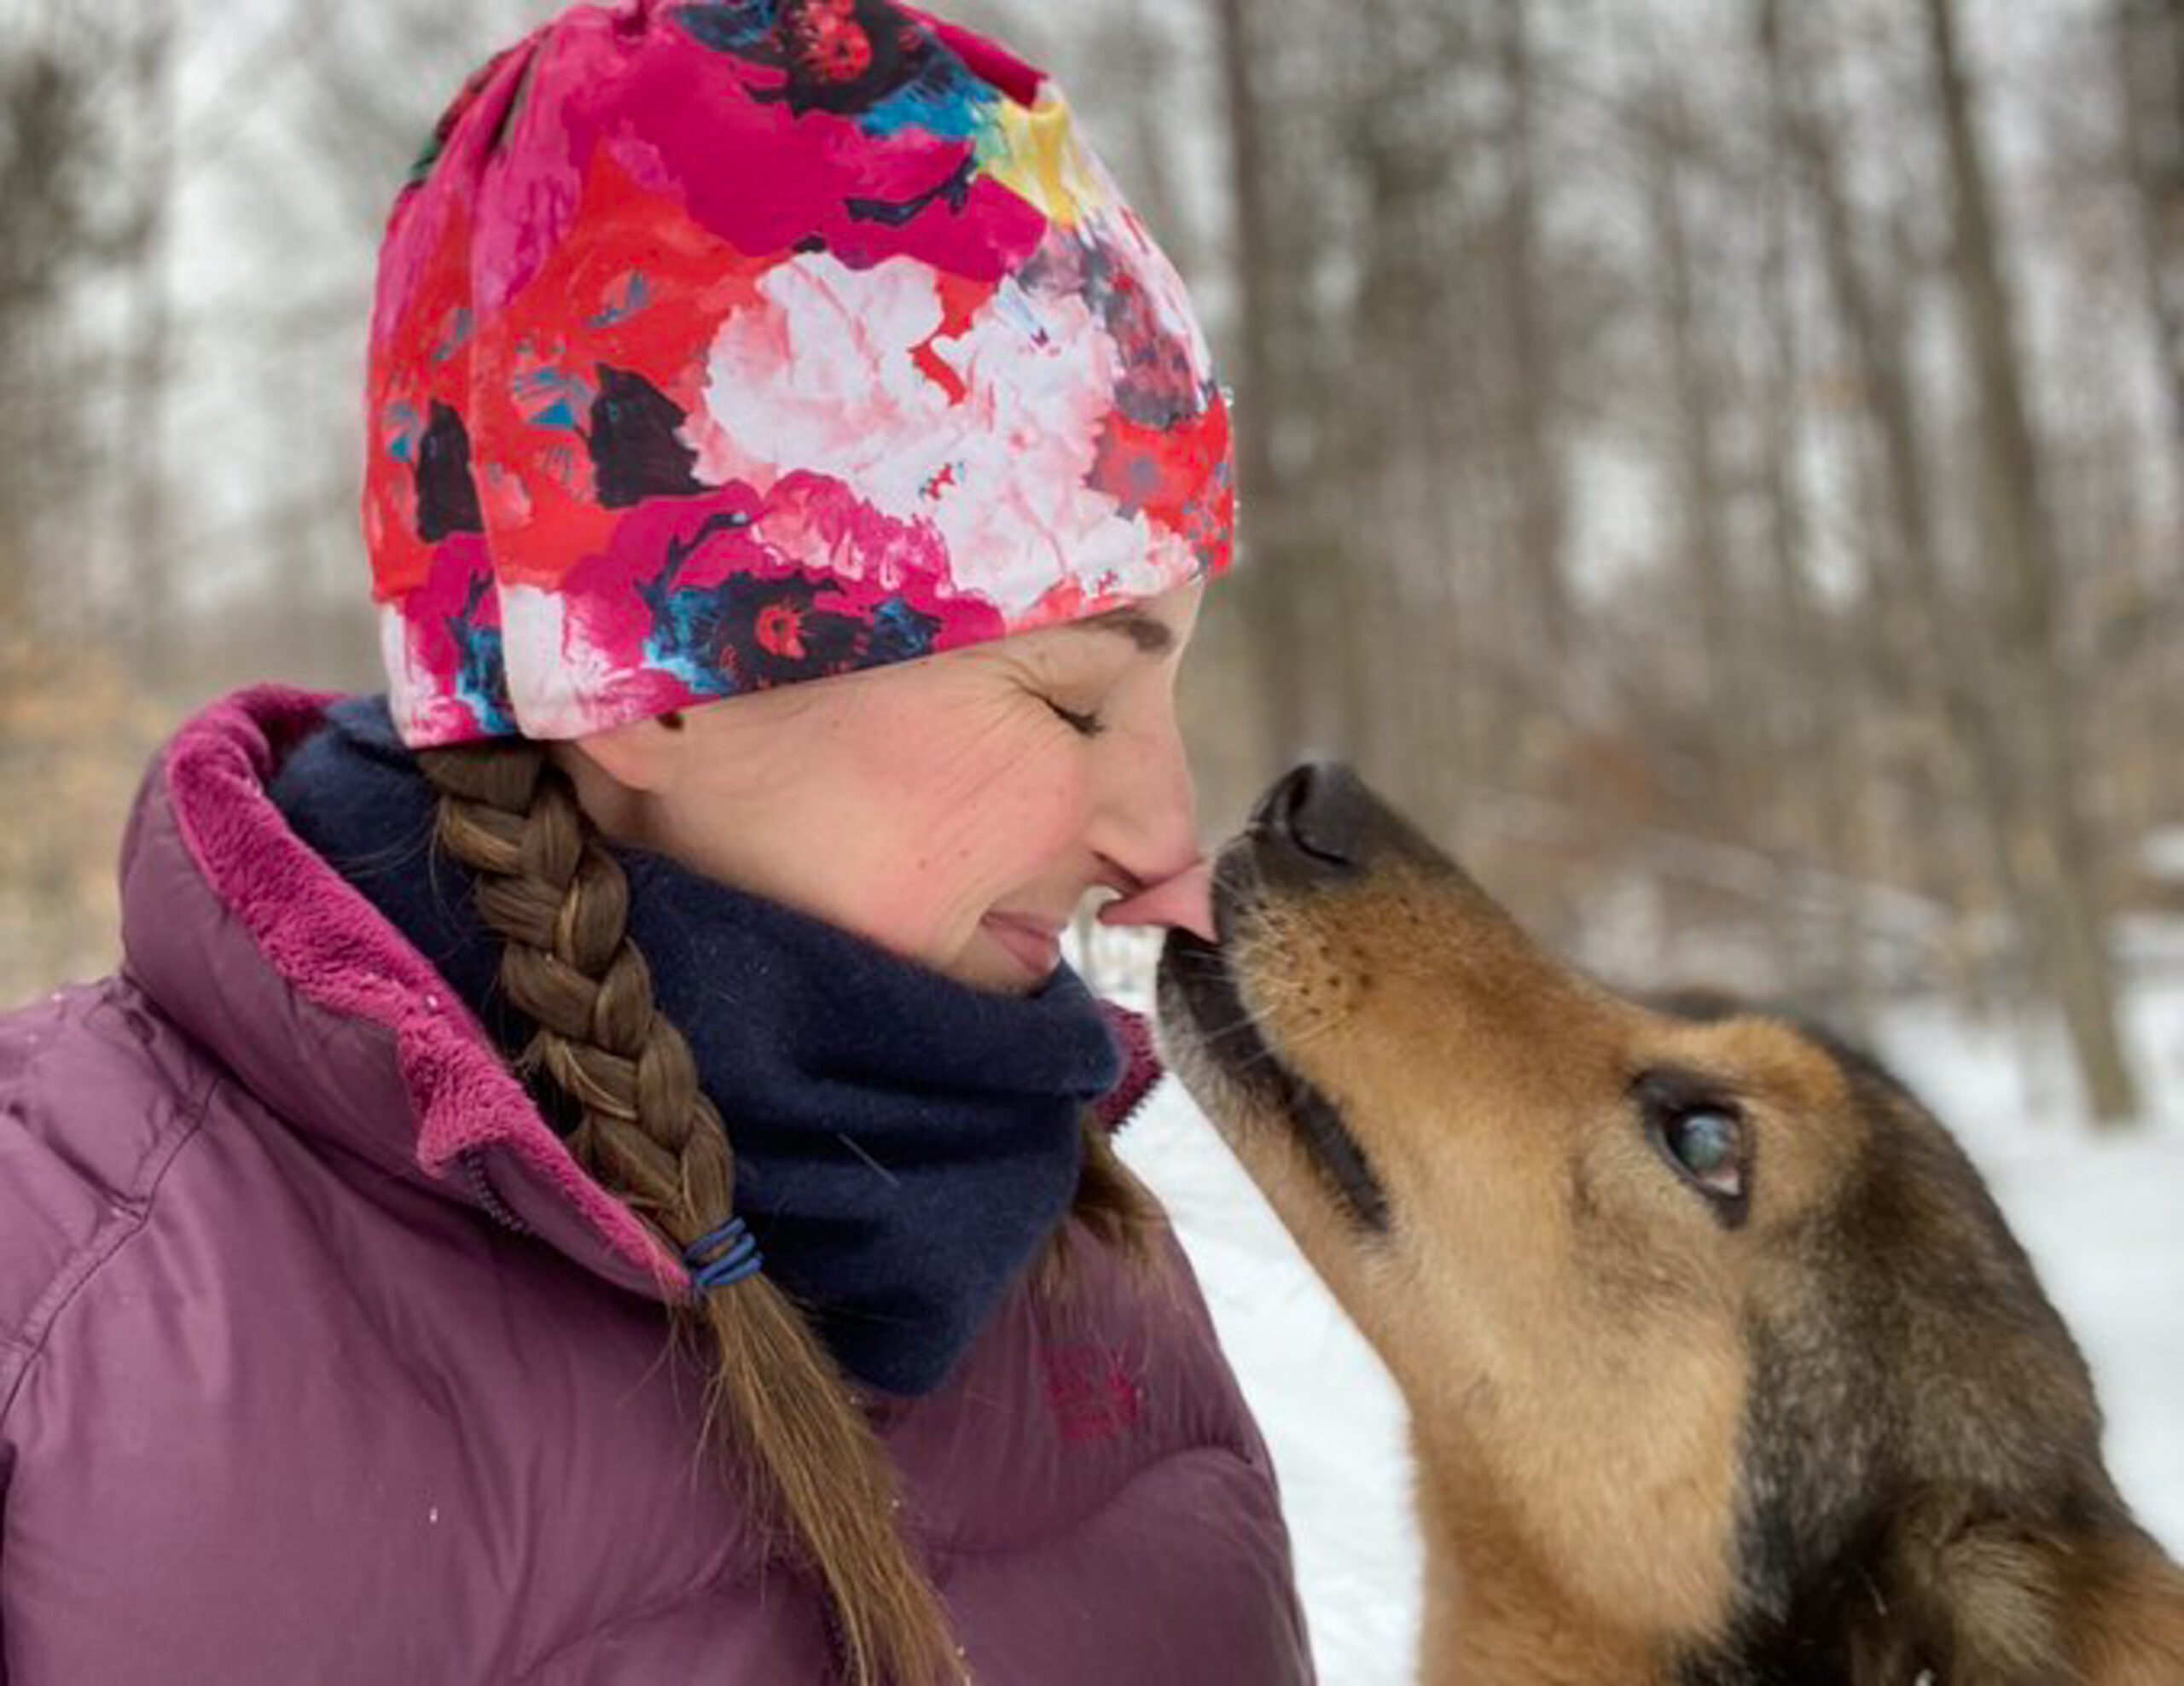 Wisconsin musher Blair Braverman with one of the dogs on the trail